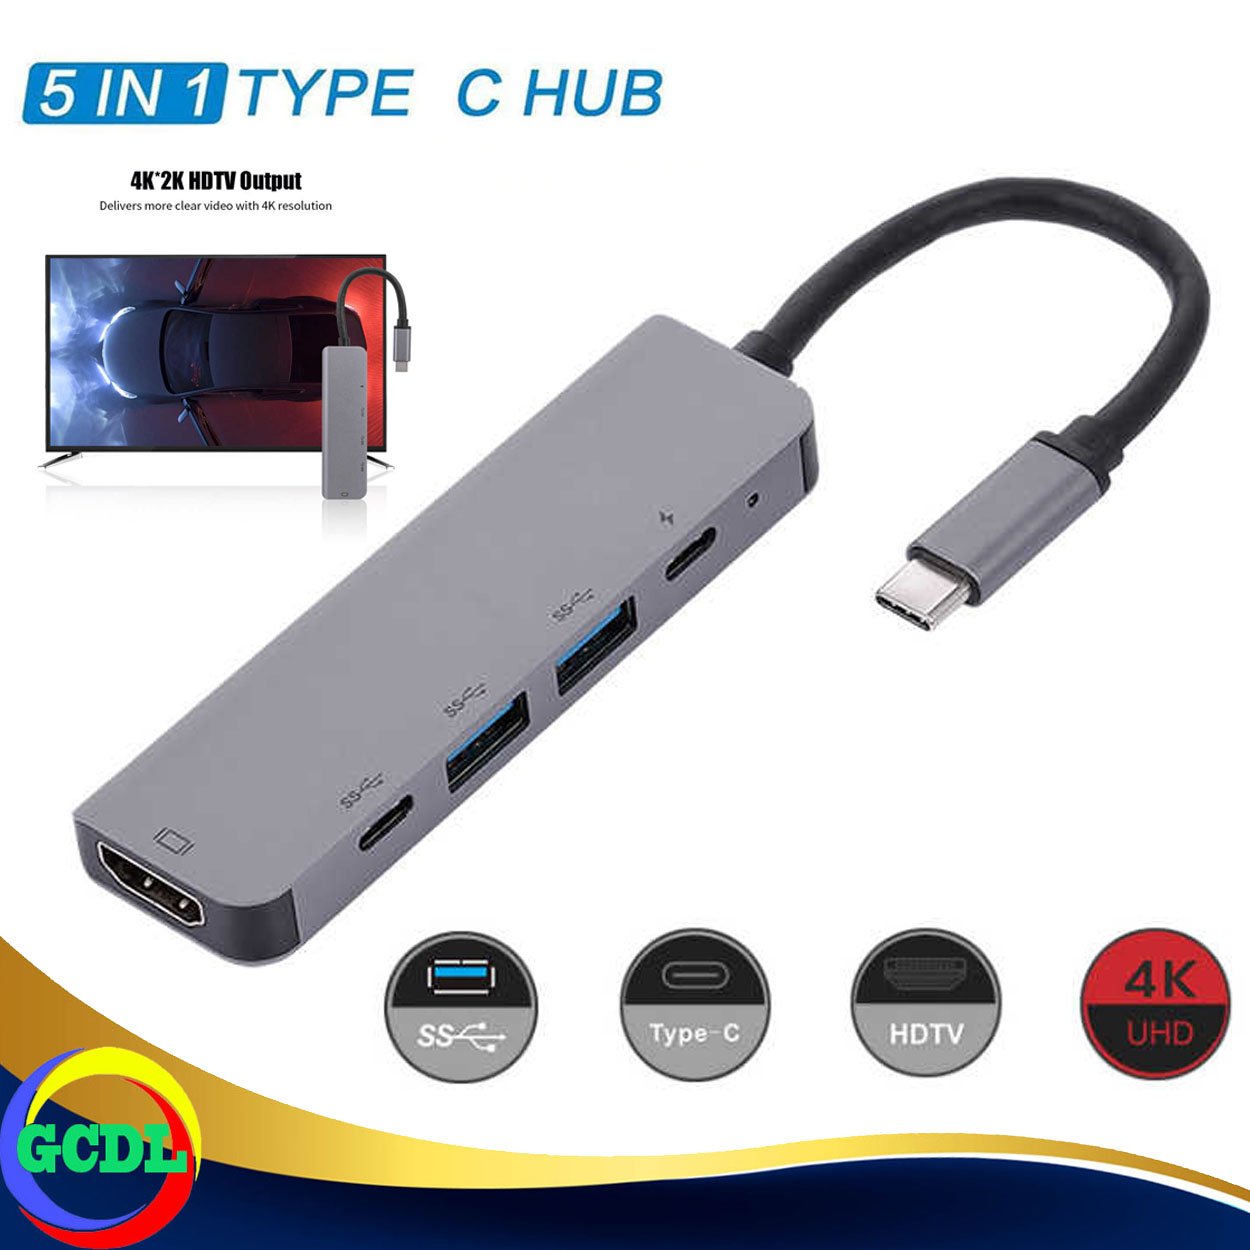 Type-C USB C to 4K HDMI USB 3.0 SD TF Card Reader 5in1 Hub Adapter for Macbook 